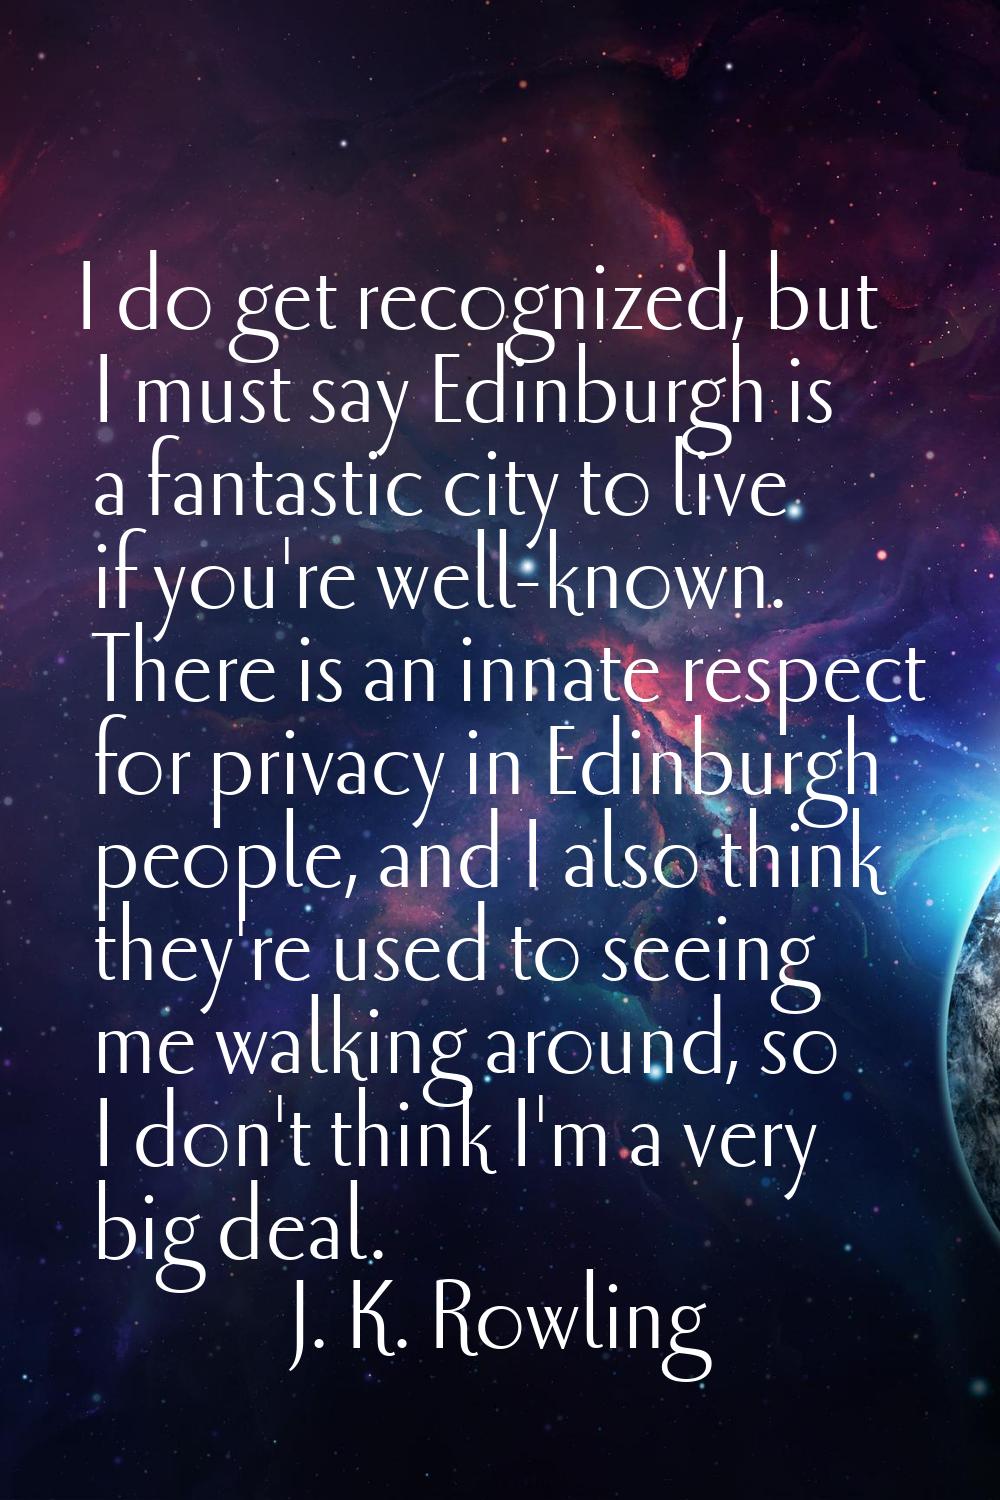 I do get recognized, but I must say Edinburgh is a fantastic city to live if you're well-known. The